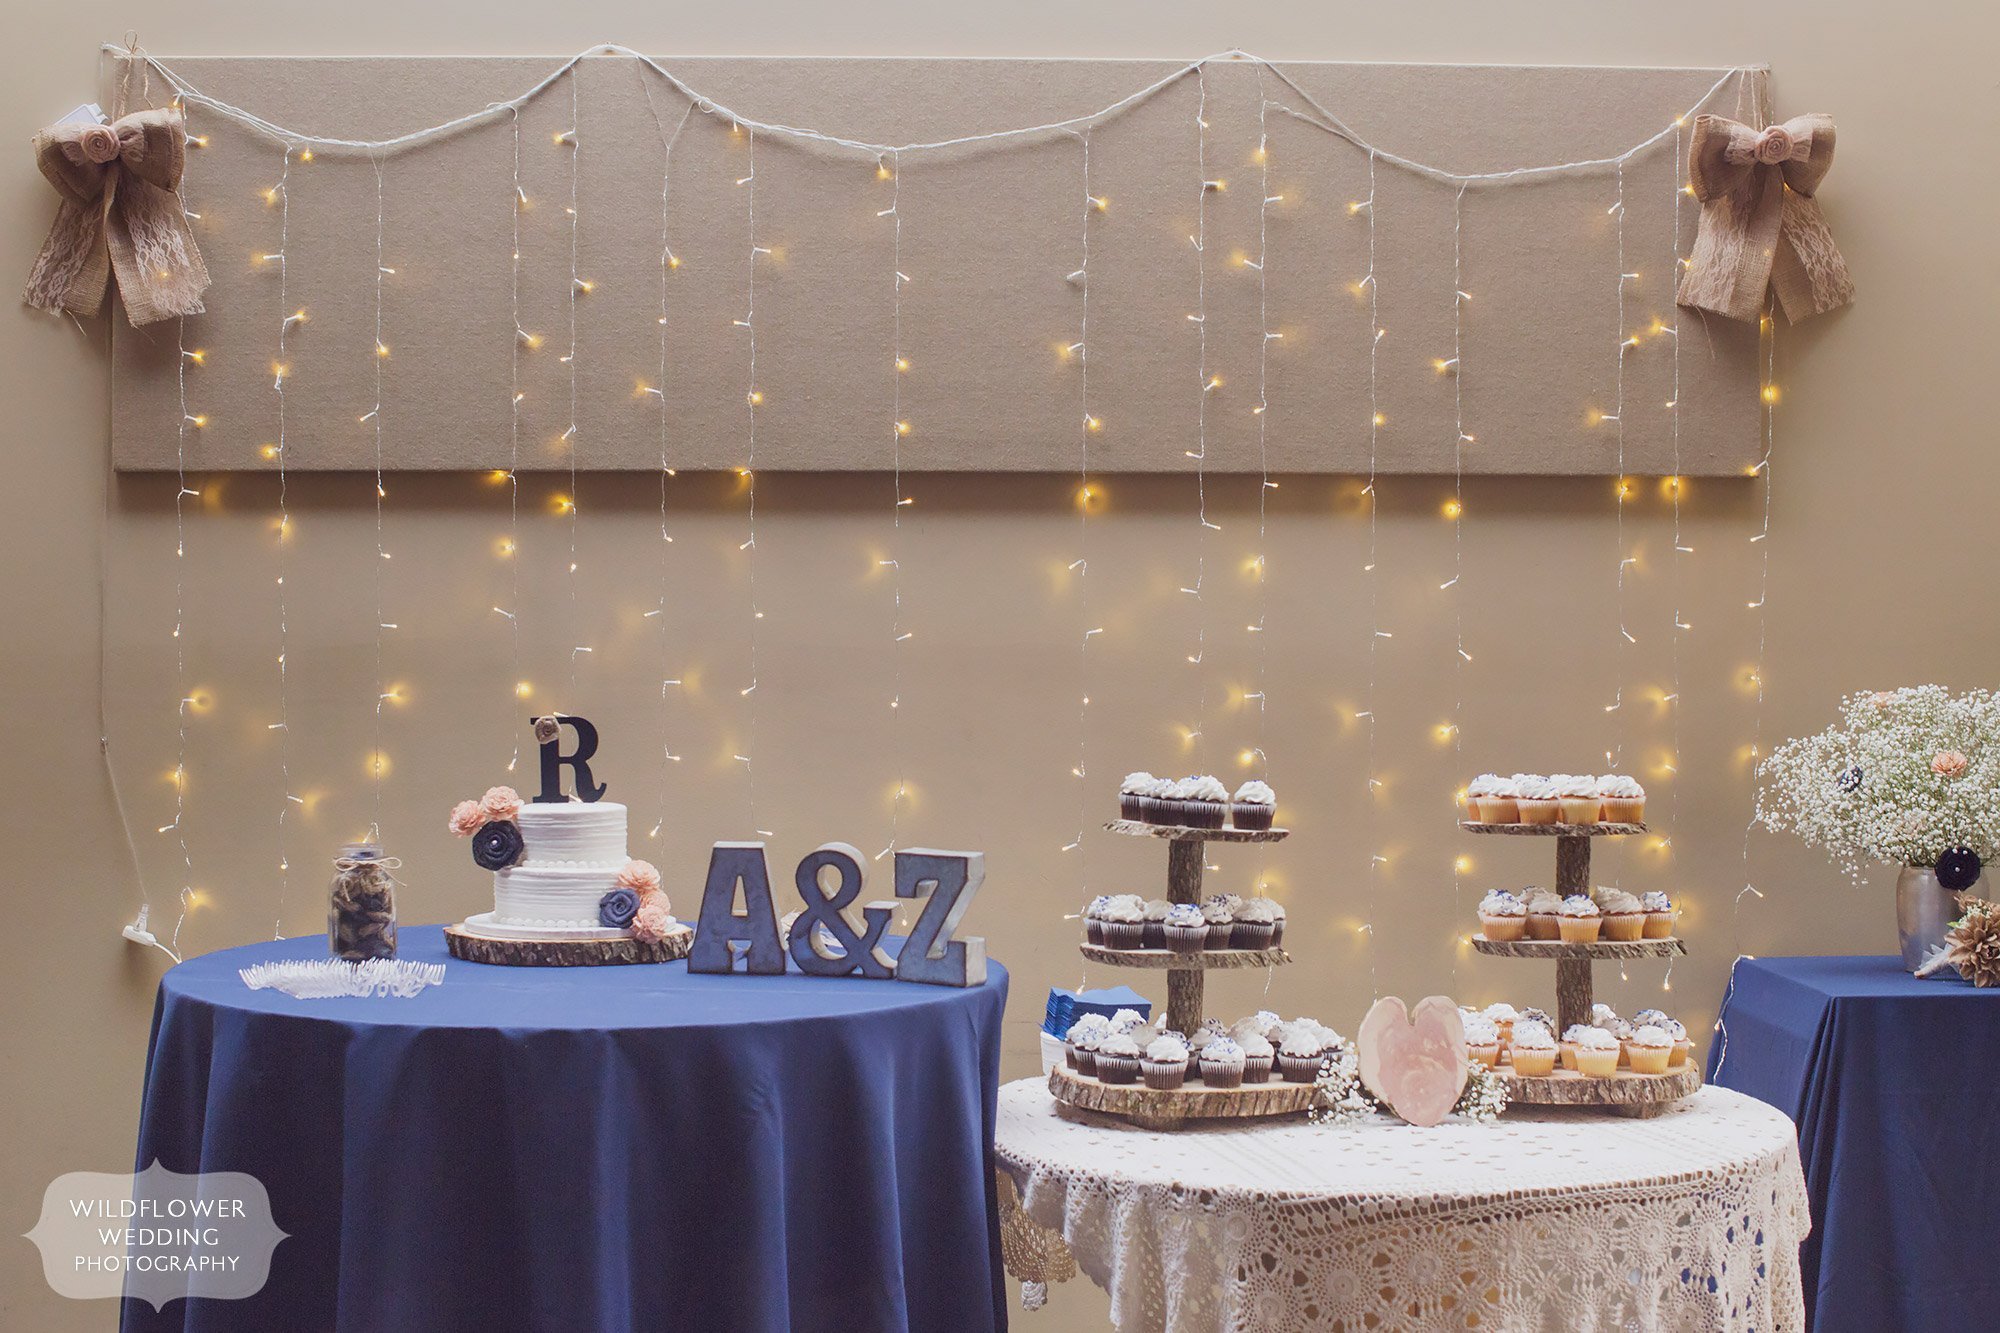 Twinkle lights hang behind this country wedding dessert table with cupcakes and a rustic wooden stand.